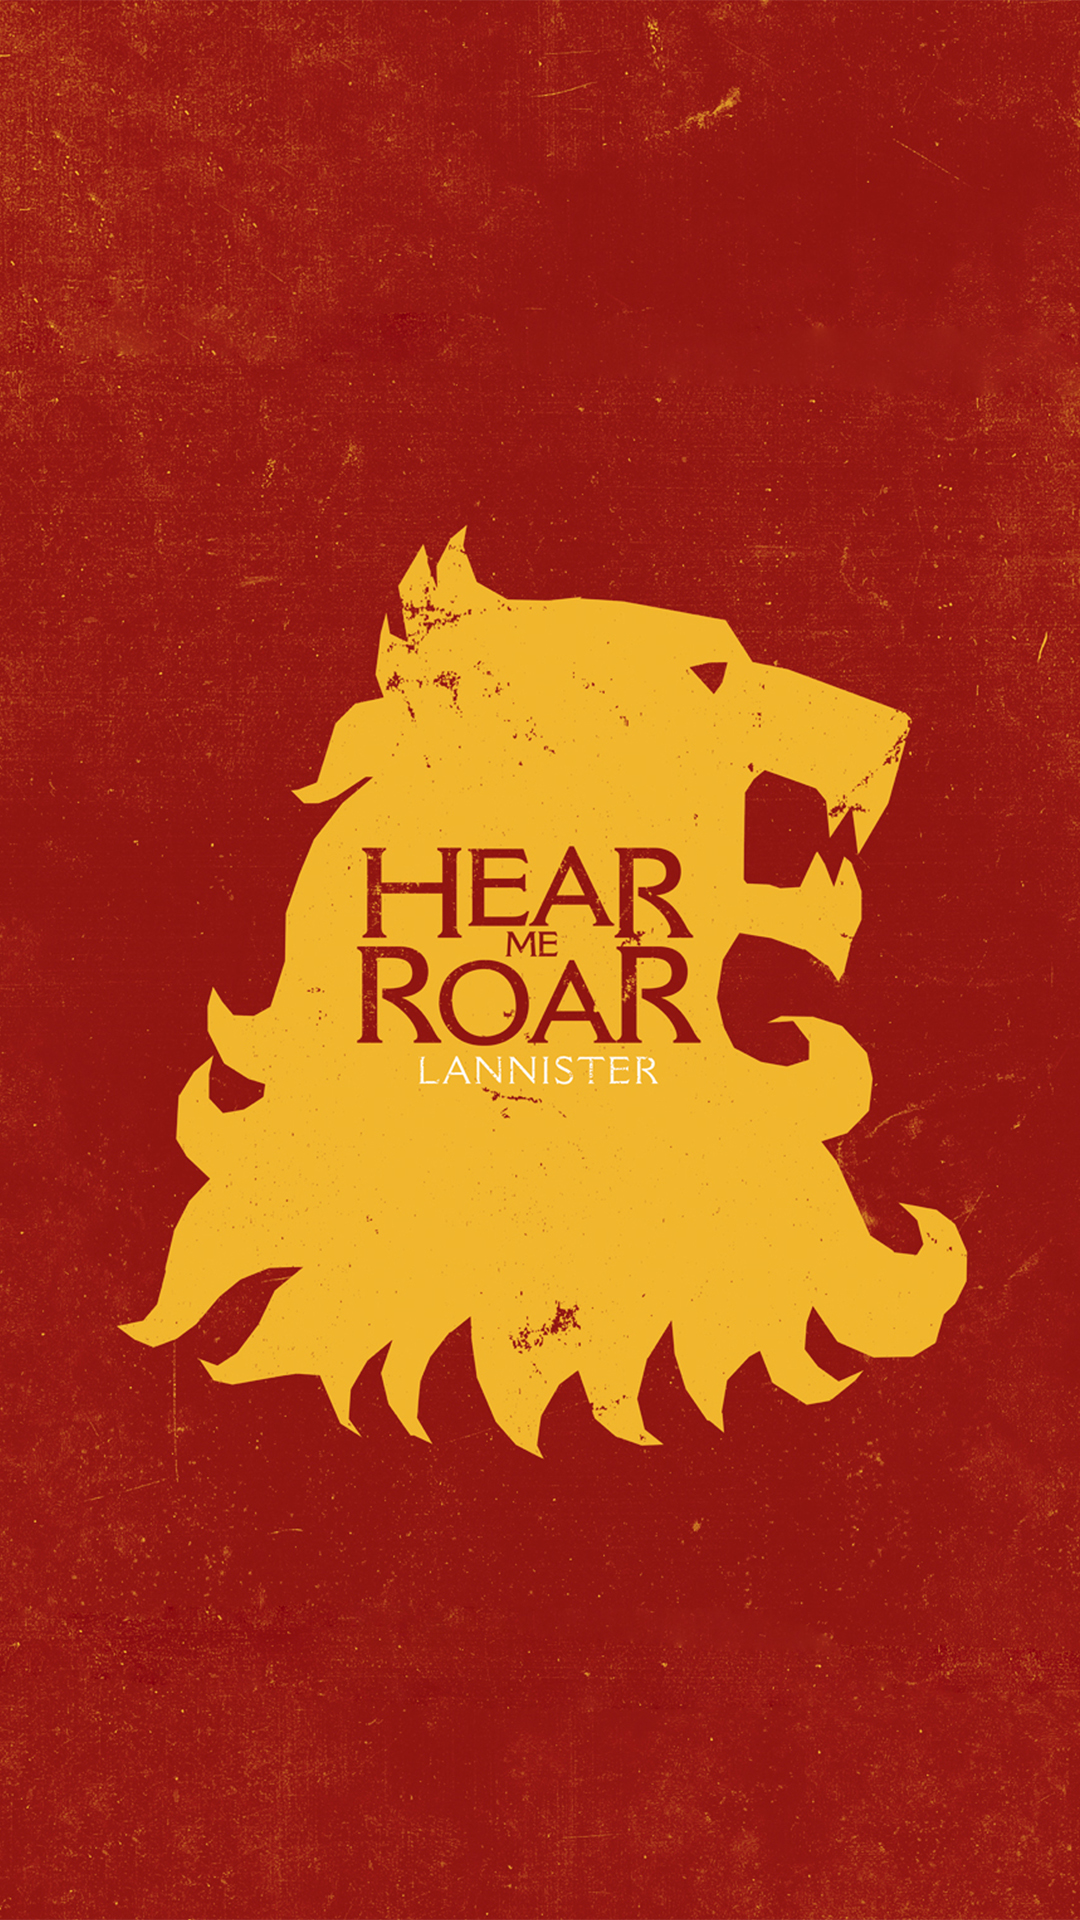 Game Of Thrones Hear Me Roar Lannister - House Of Lannister Theme - HD Wallpaper 